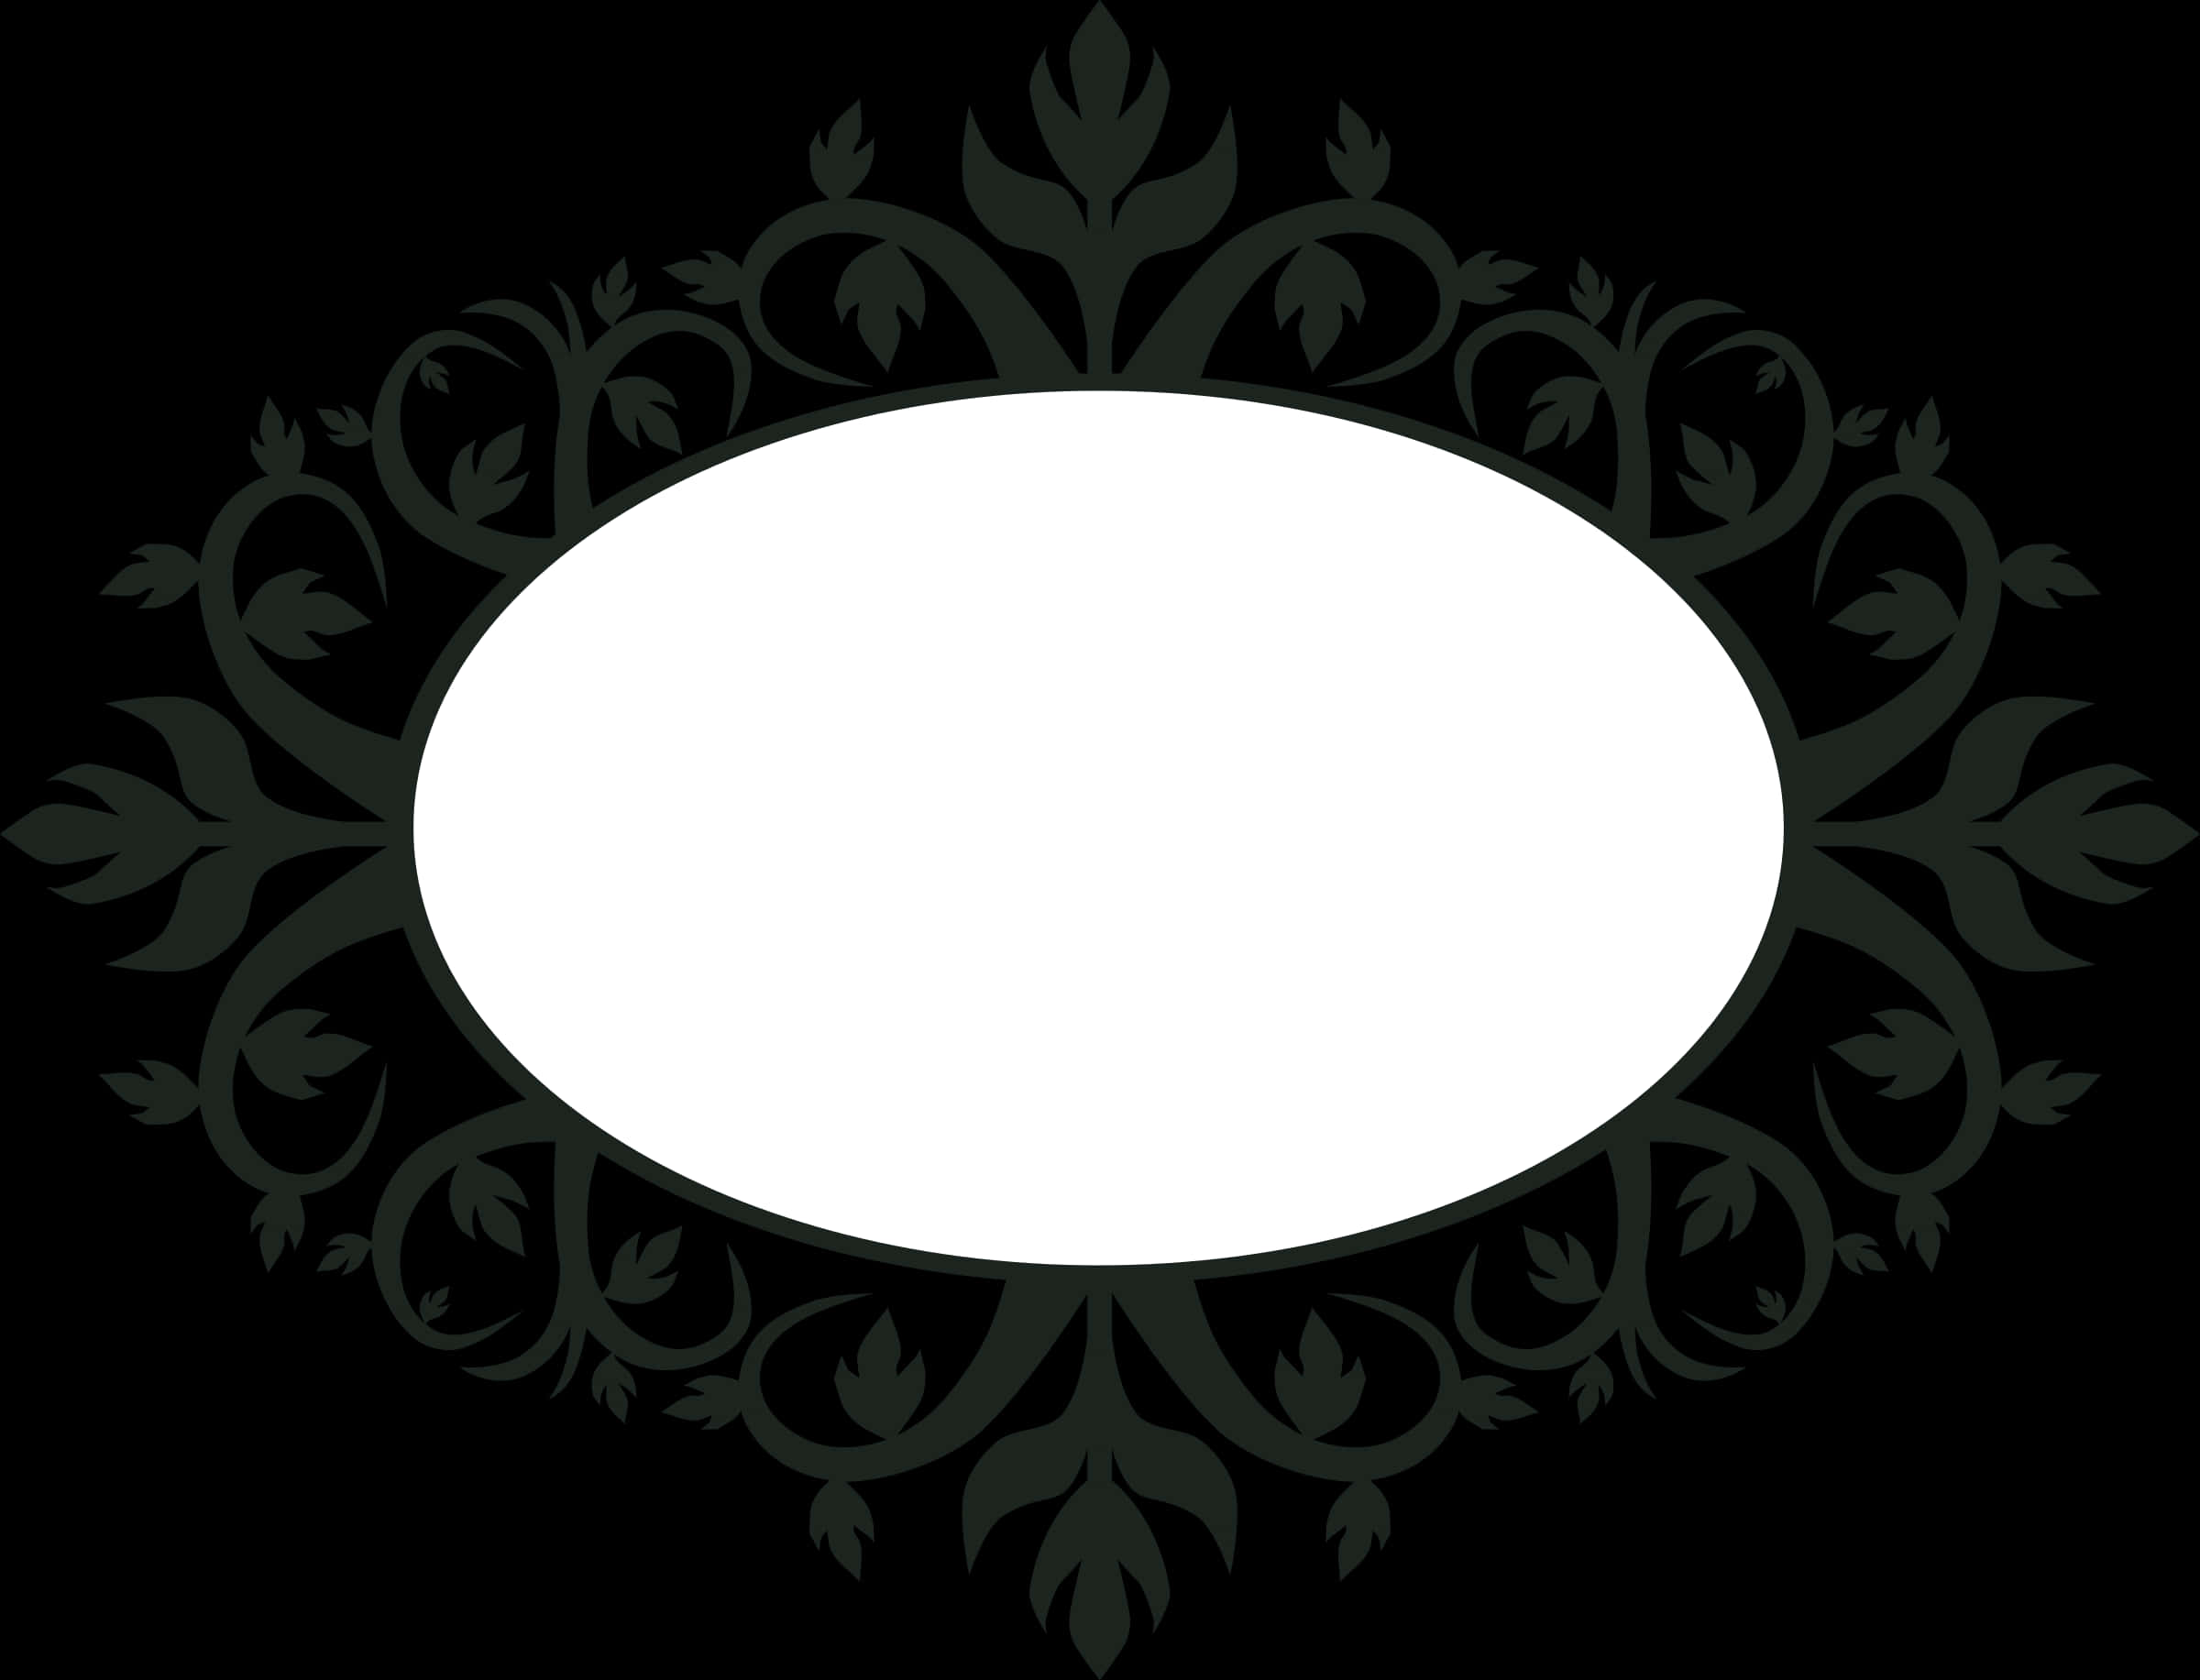 A Black And White Oval Frame